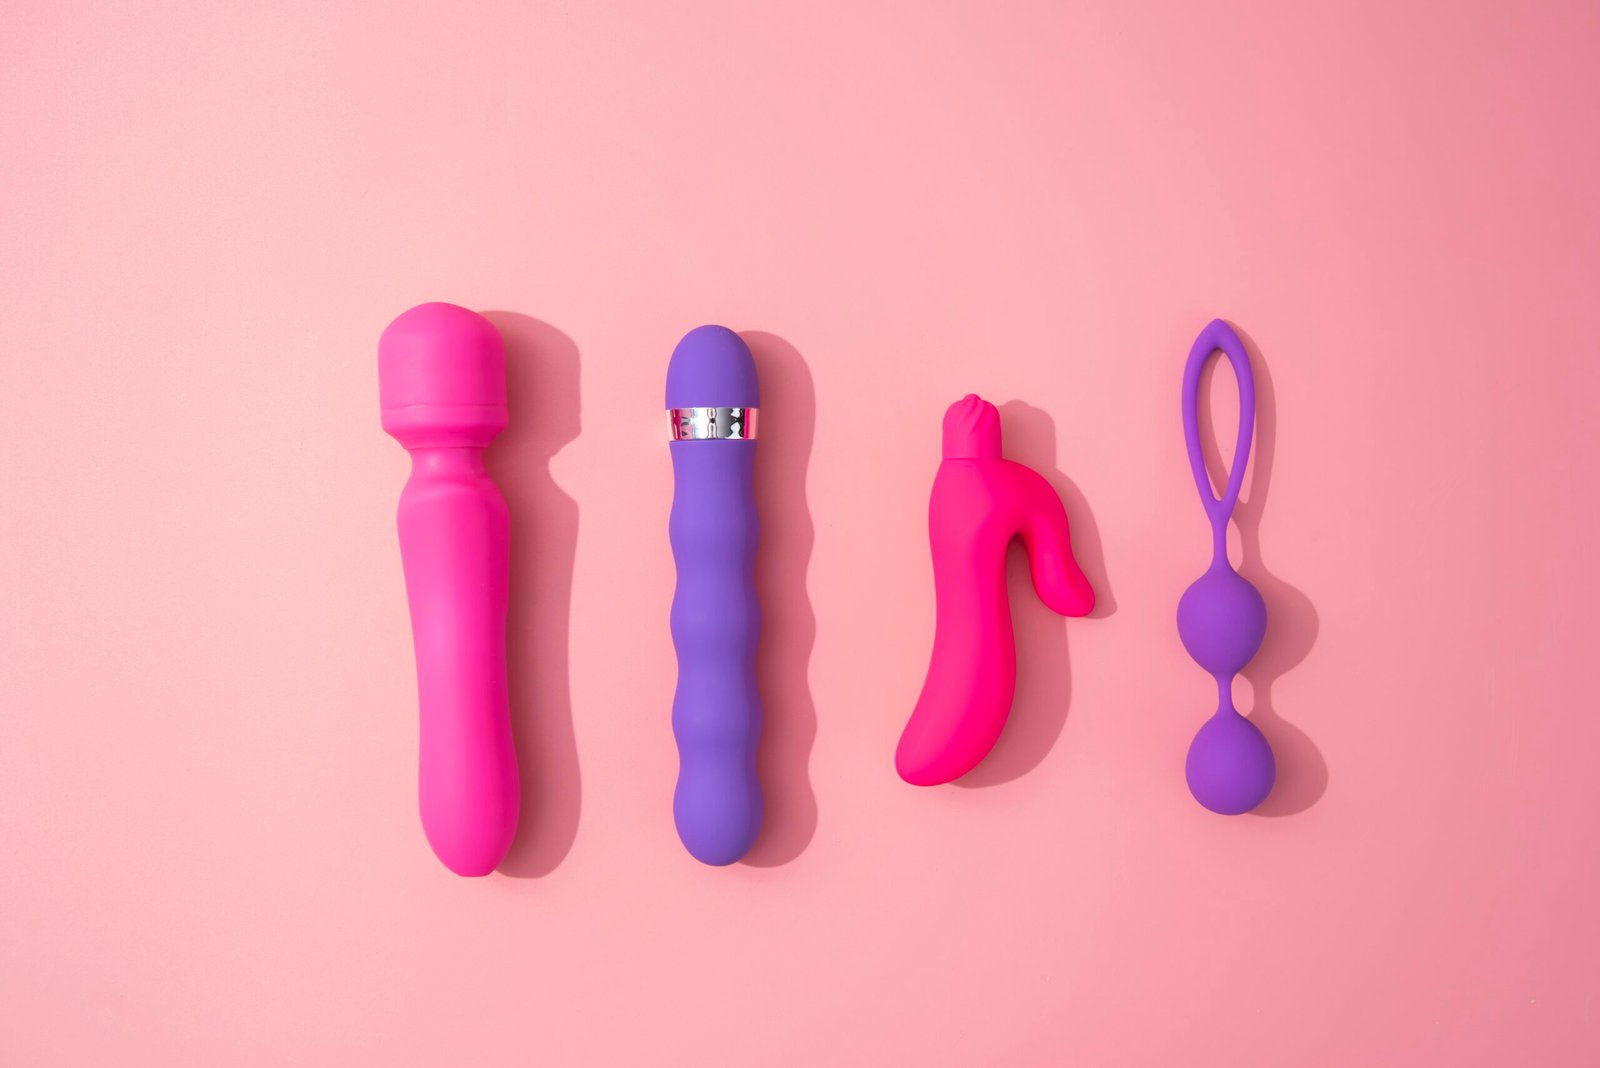 An image of sex toys